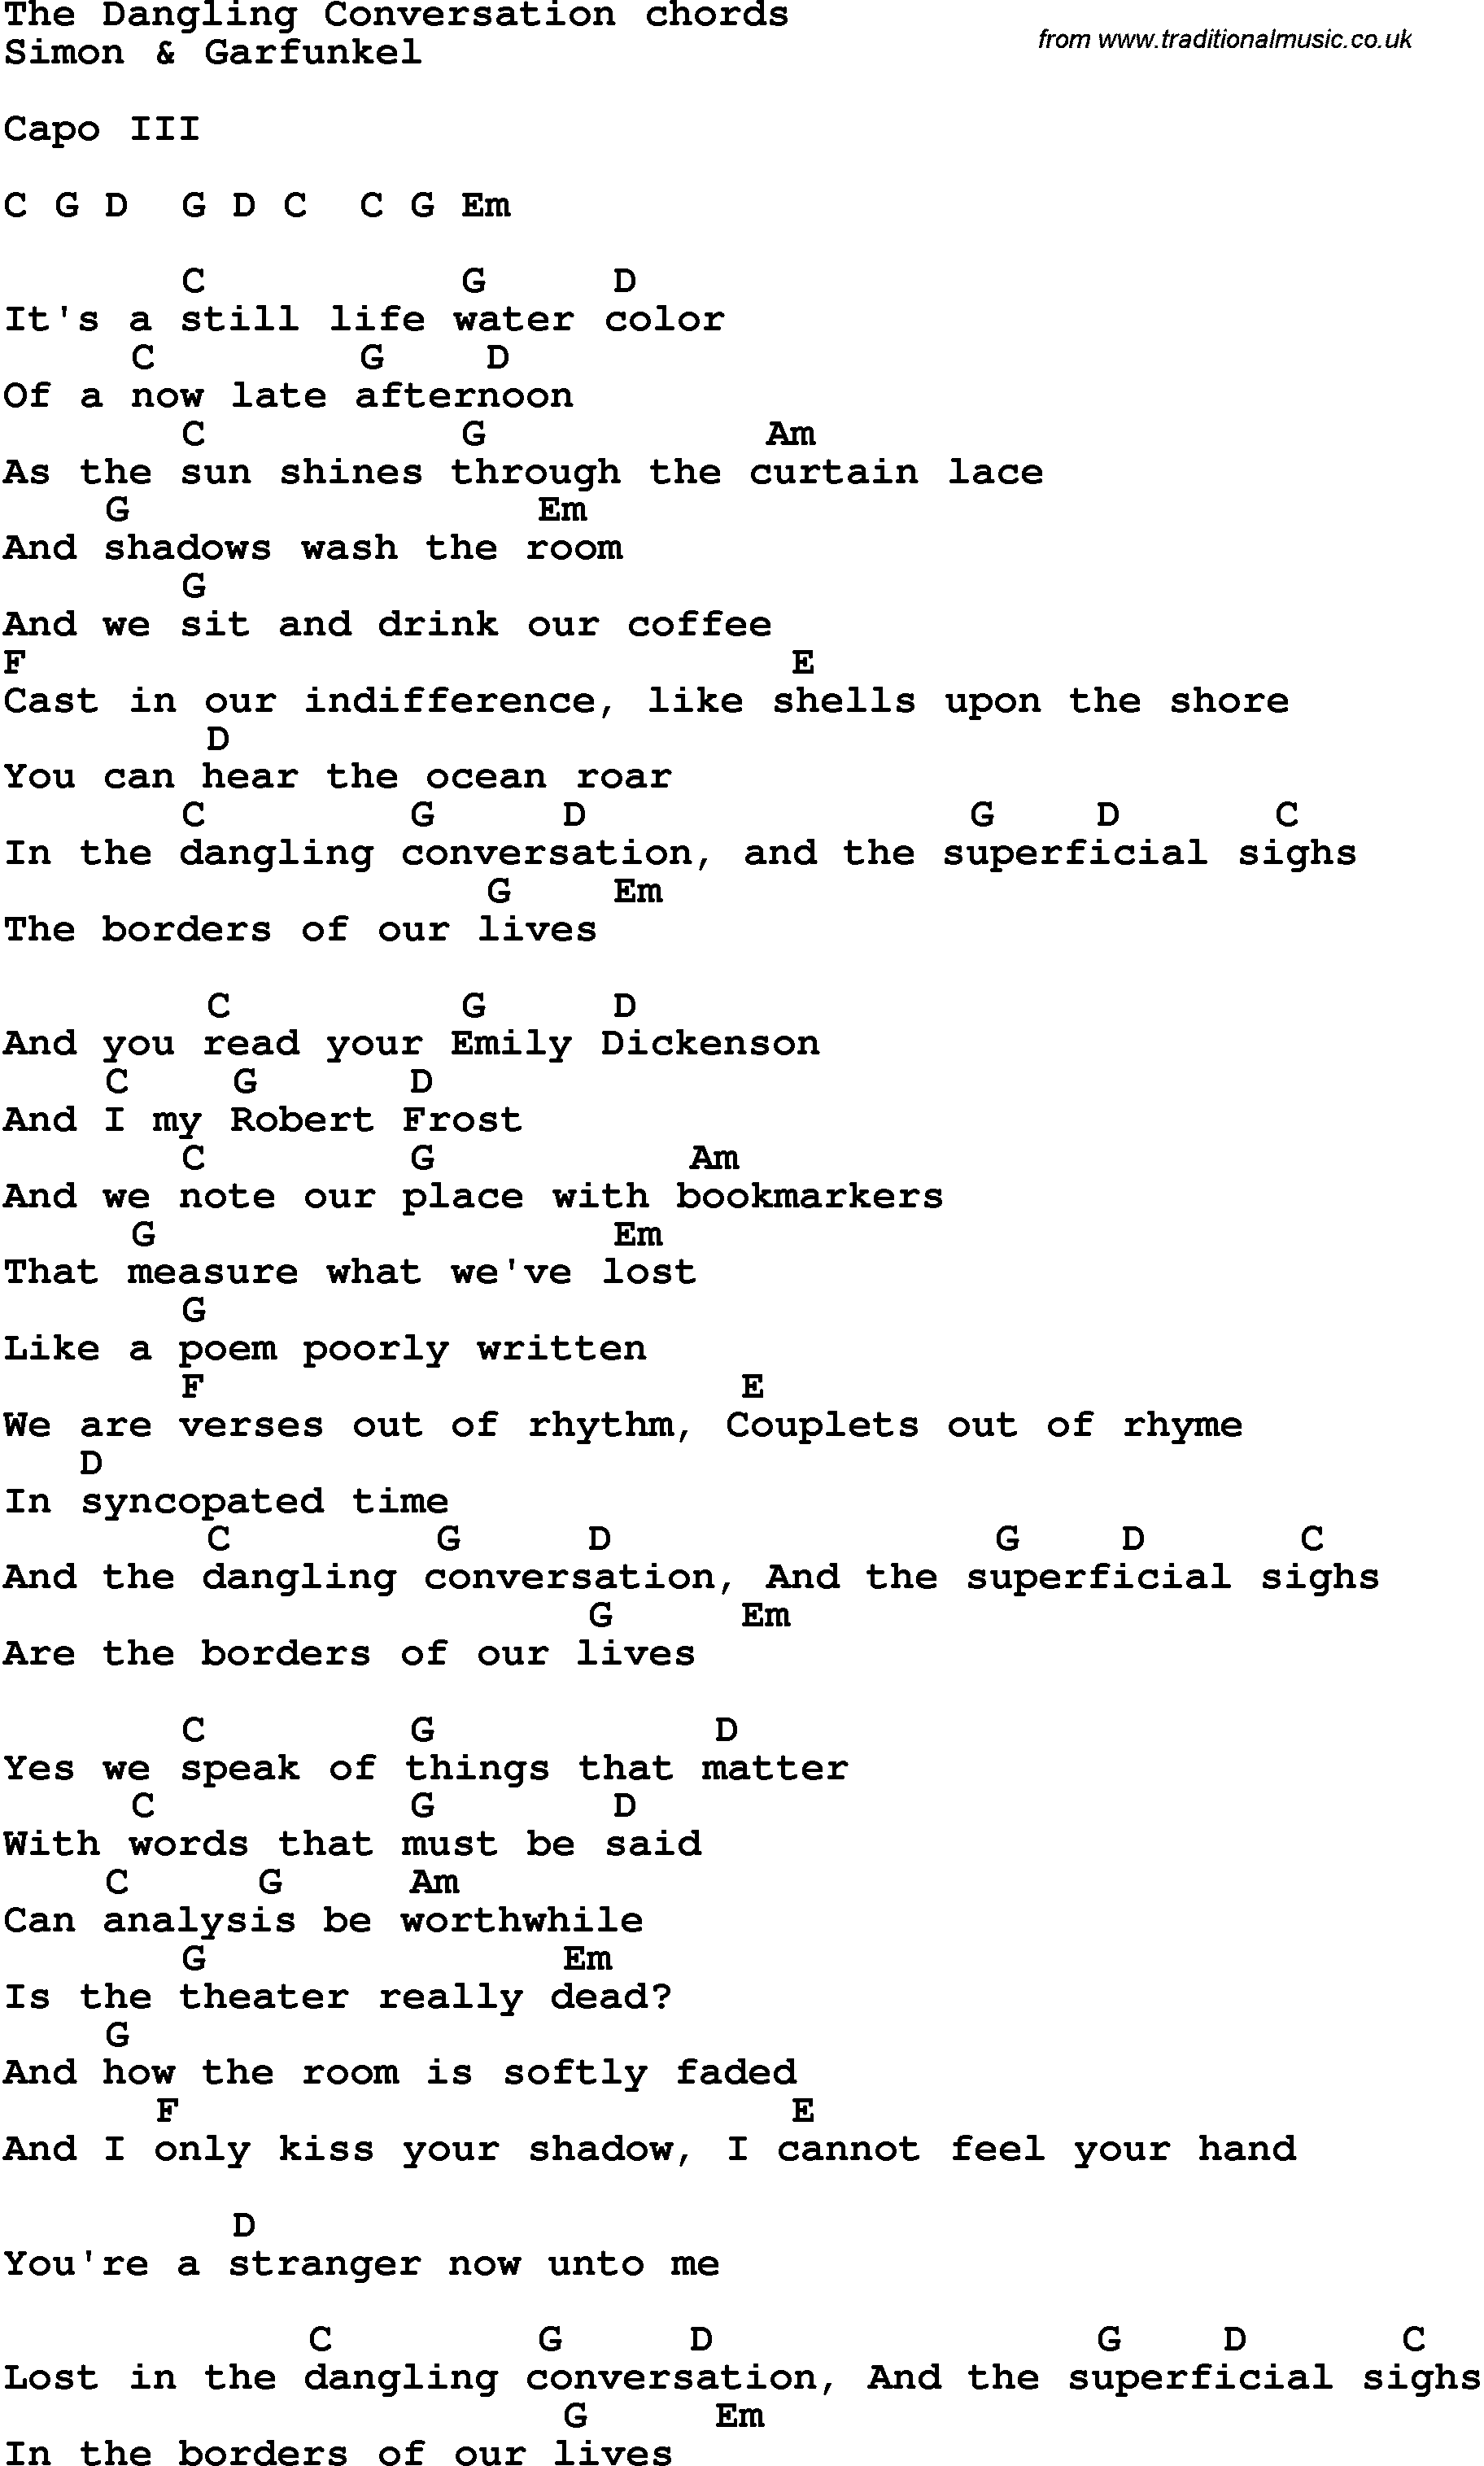 Song Lyrics with guitar chords for The Dangling Conversation